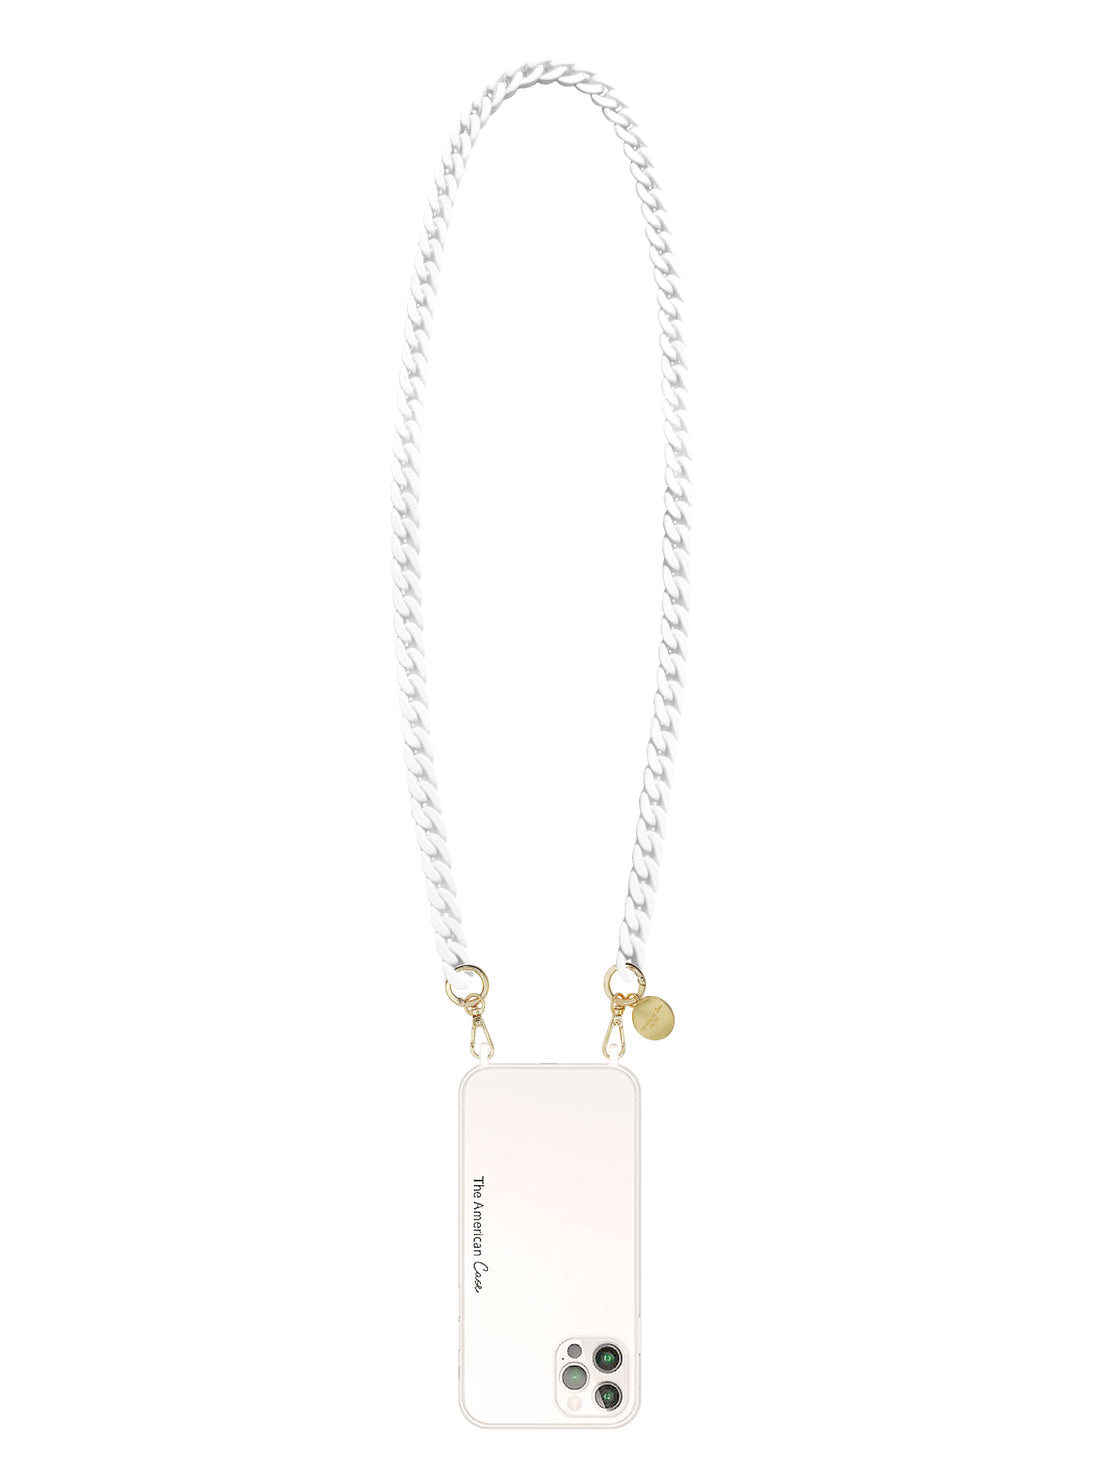 Avery - White Crossbody Resin Phone Chain with Golden Carabiners